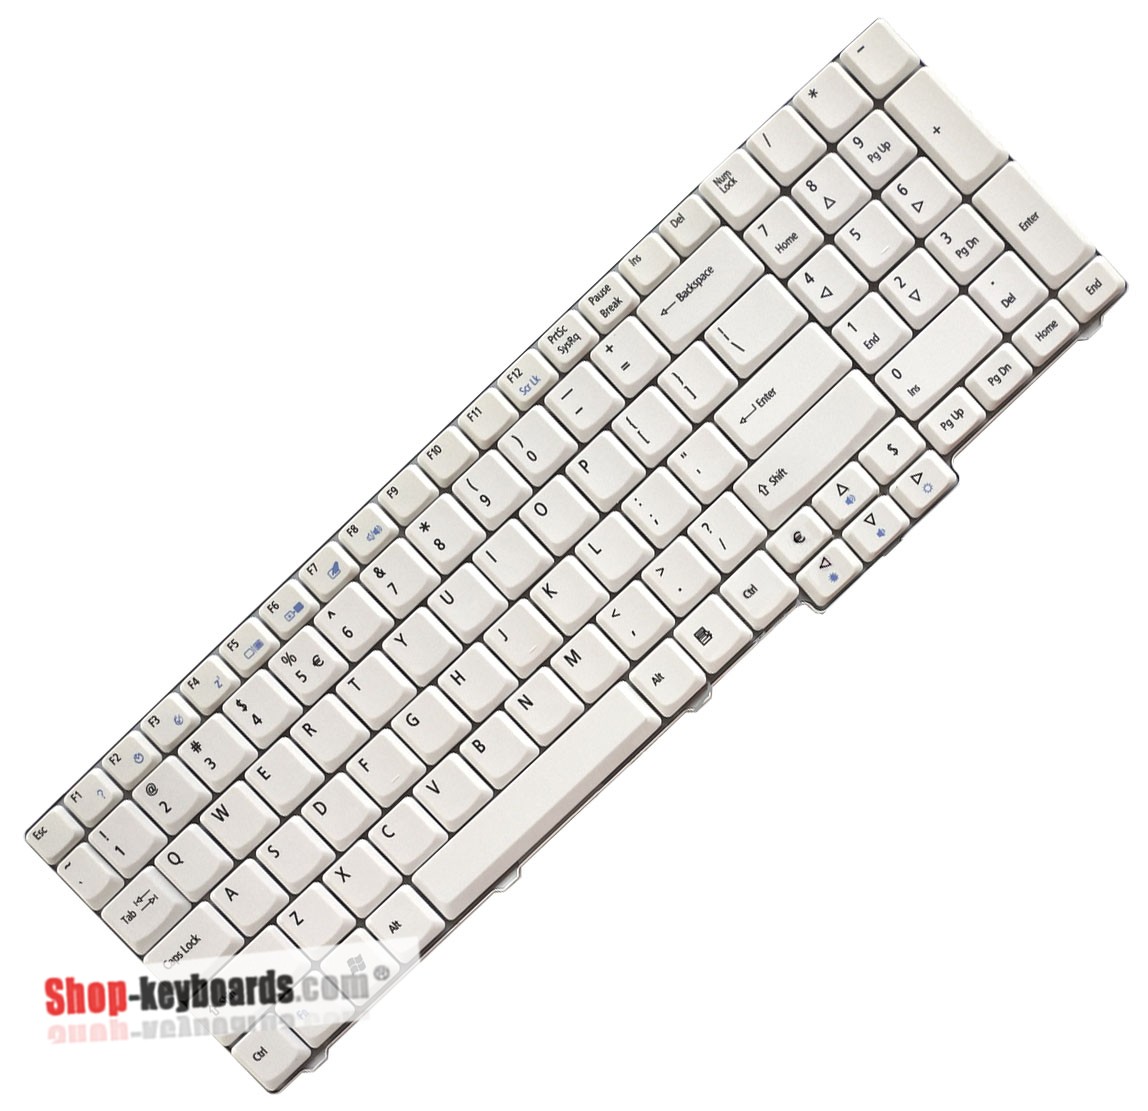 Acer Aspire 8530G-644G32MN Keyboard replacement